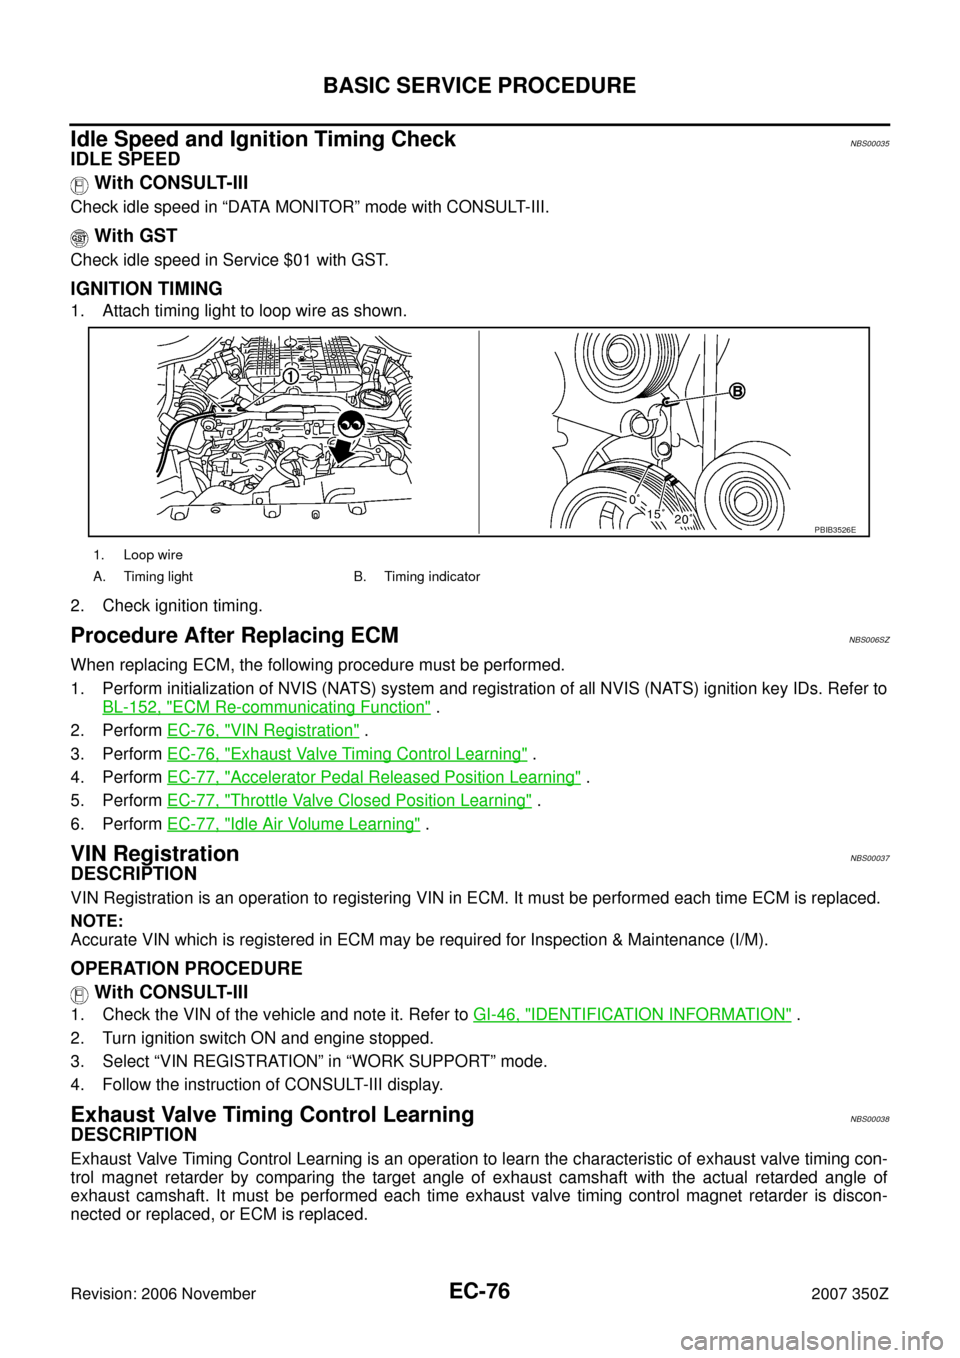 NISSAN 350Z 2007 Z33 Engine Control Owners Manual EC-76
BASIC SERVICE PROCEDURE
Revision: 2006 November2007 350Z
Idle Speed and Ignition Timing CheckNBS00035
IDLE SPEED
 With CONSULT-III
Check idle speed in “DATA MONITOR” mode with CONSULT-III.
 